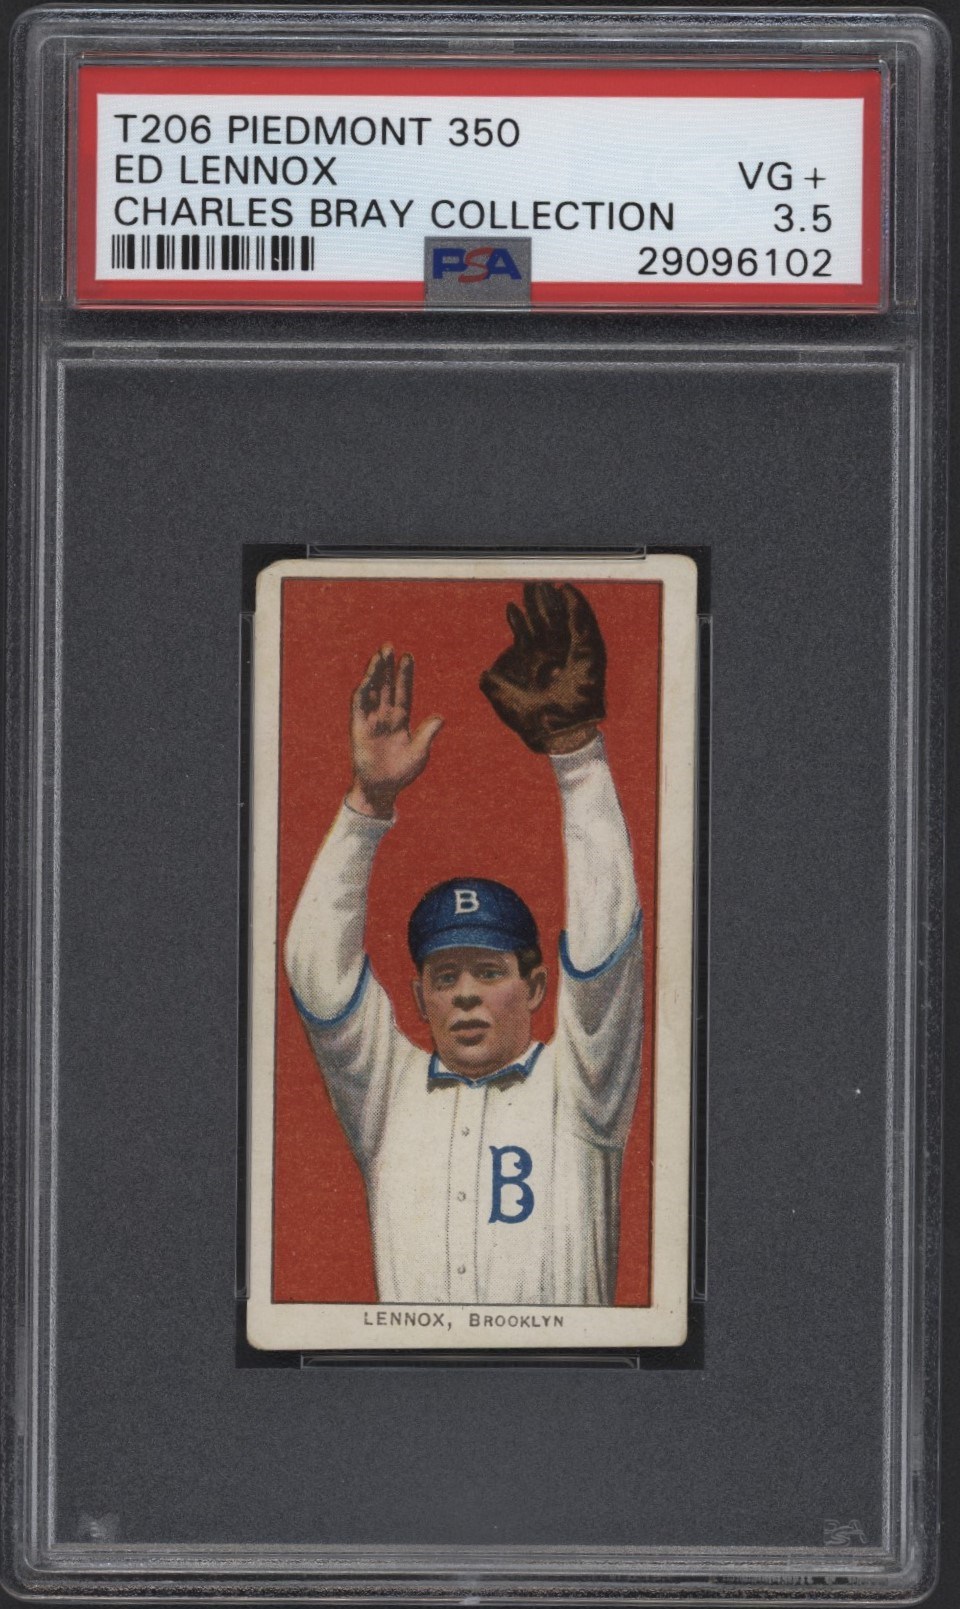 Baseball and Trading Cards - T206 Piedmont 350 Ed Lennox PSA 3.5 From the Charles Bray Collection